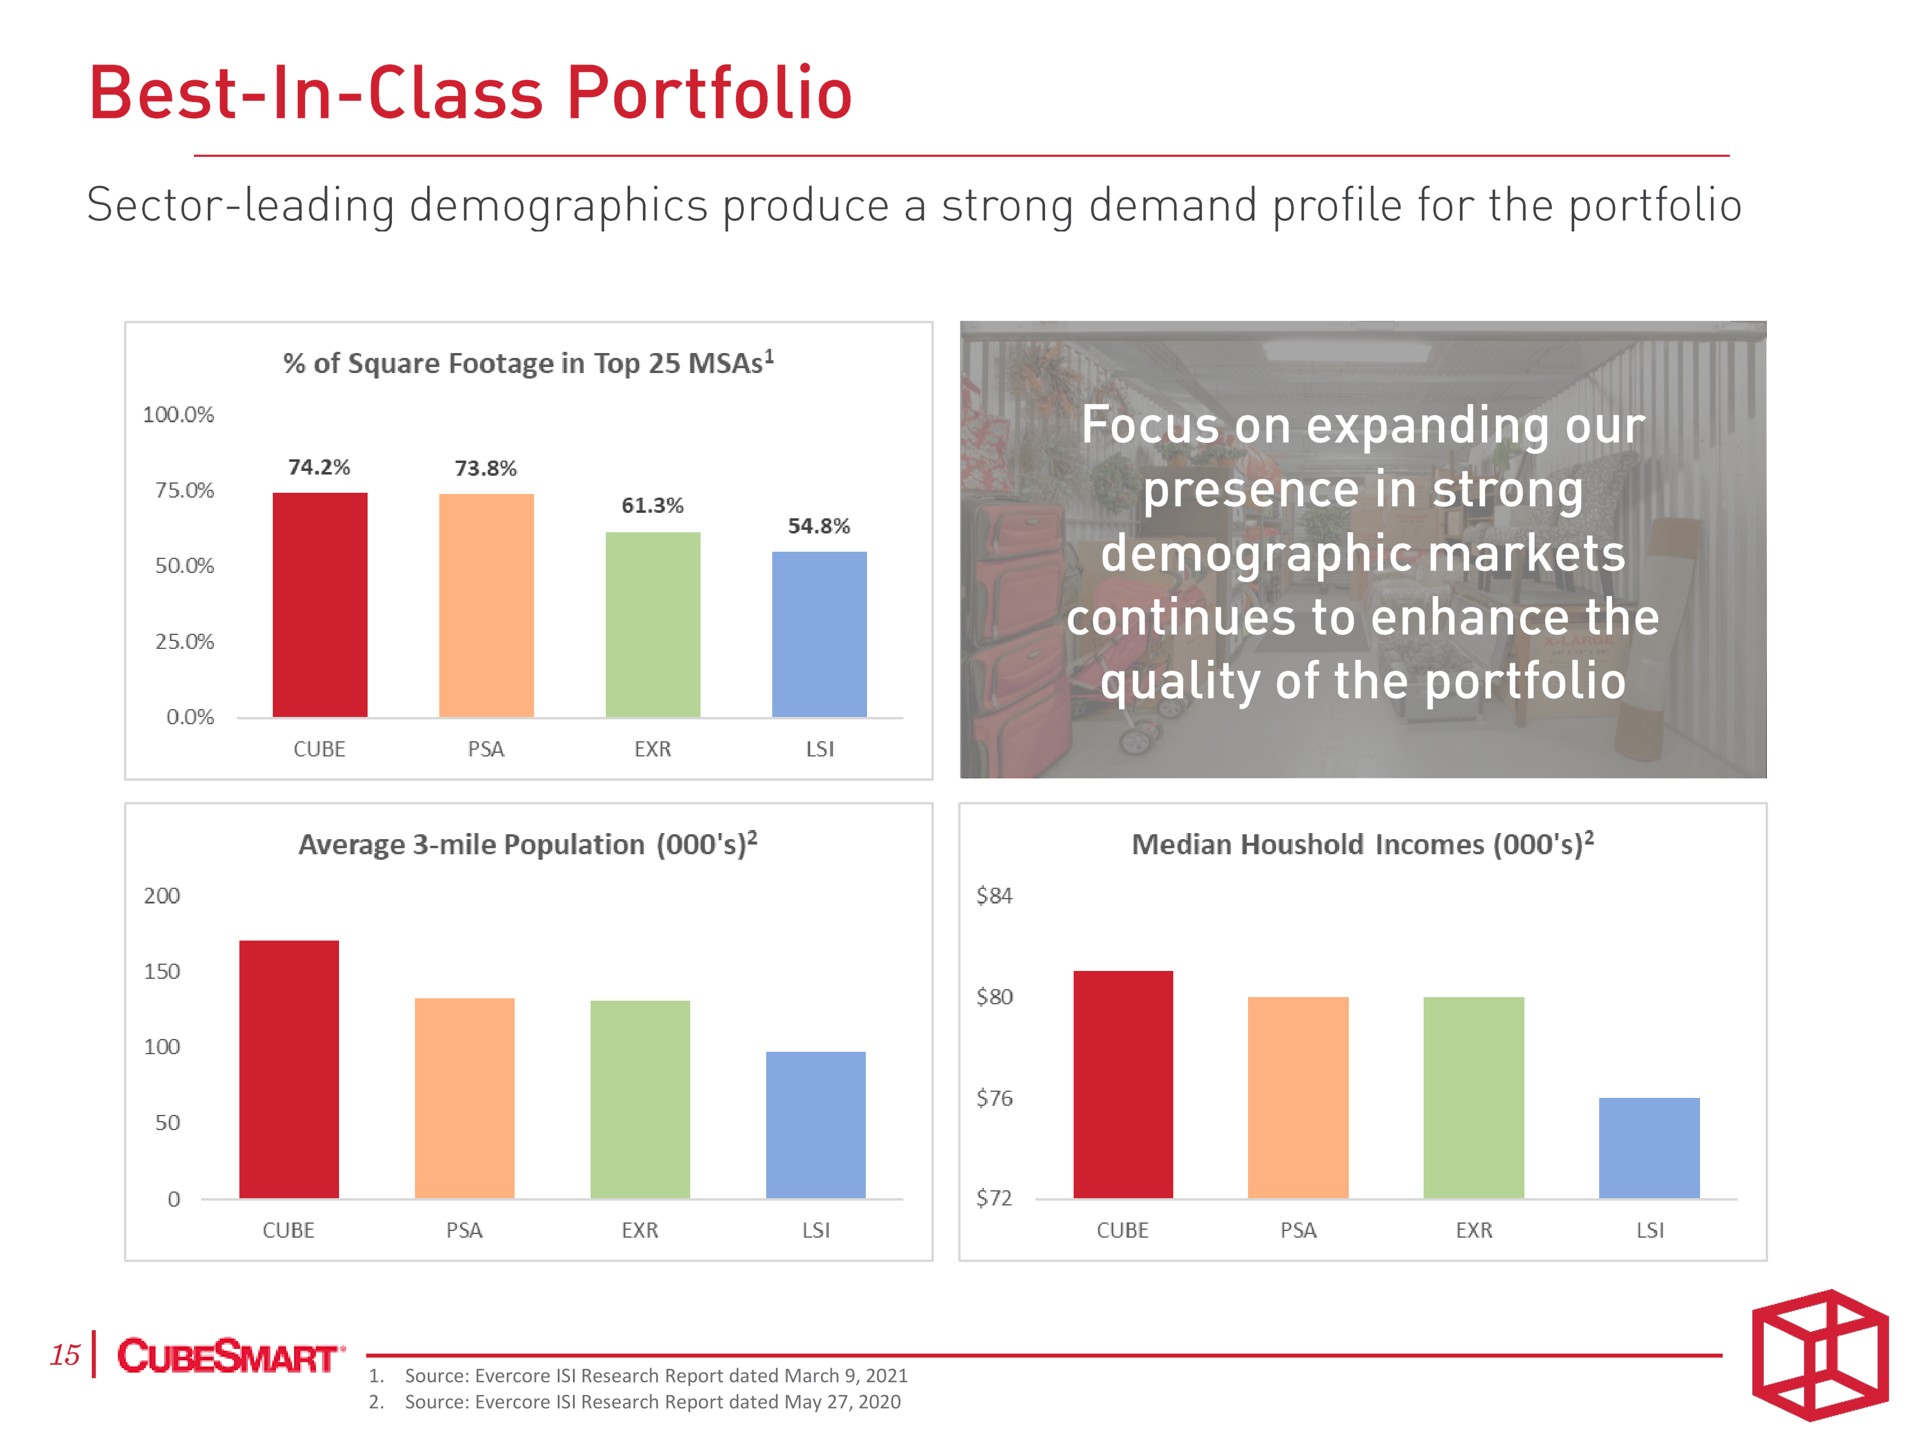 best in class portfolio focus on expanding our demographic markets continues to enhance the quality of the portfolio | CubeSmart